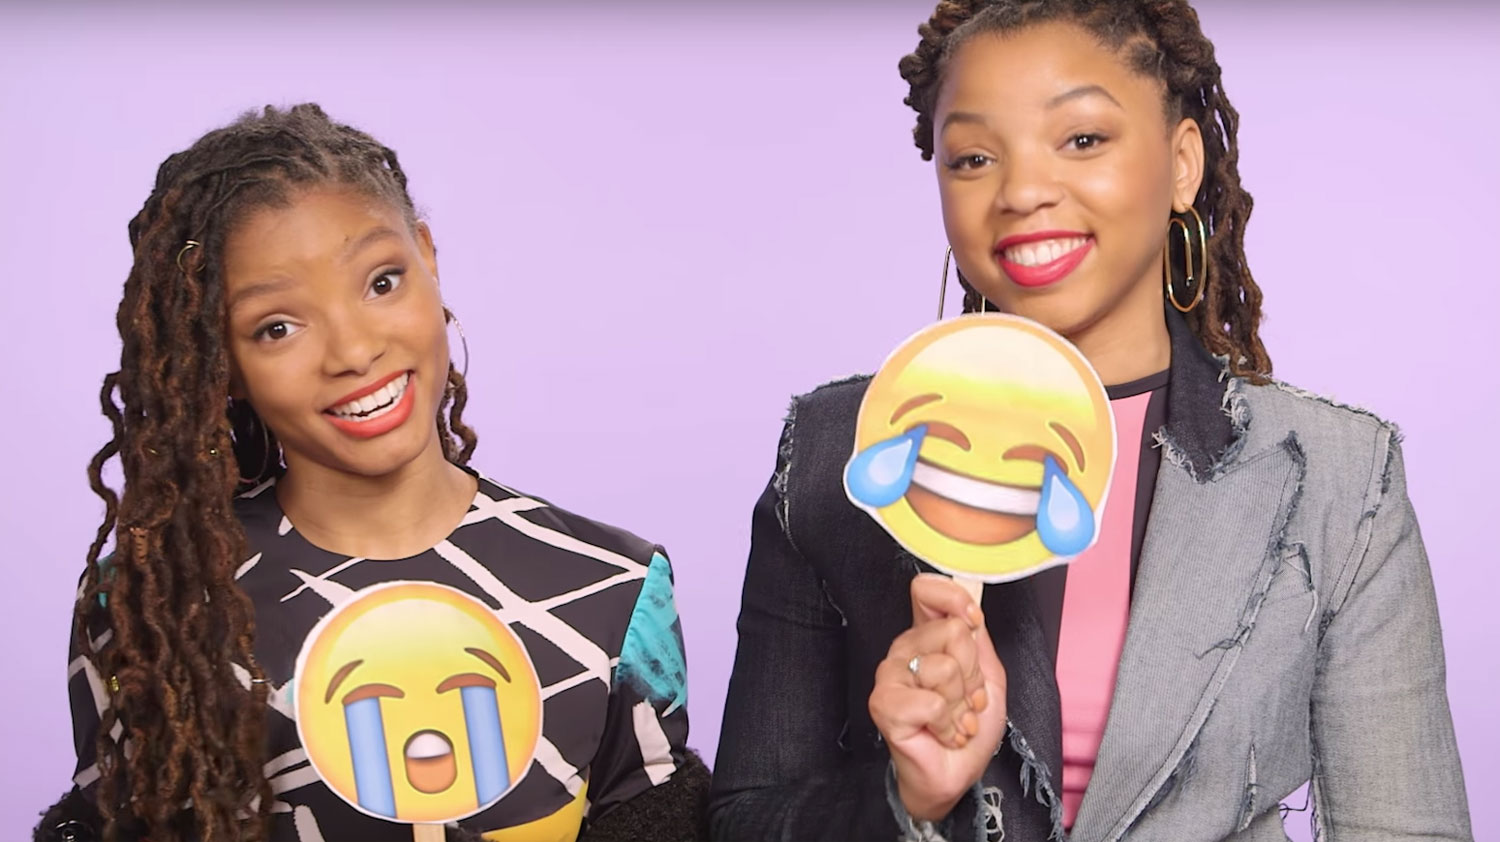 Chloe X Halle Reveal Their Most Embarrassing Moments Video Chloe Bailey Chloe X Halle 5194